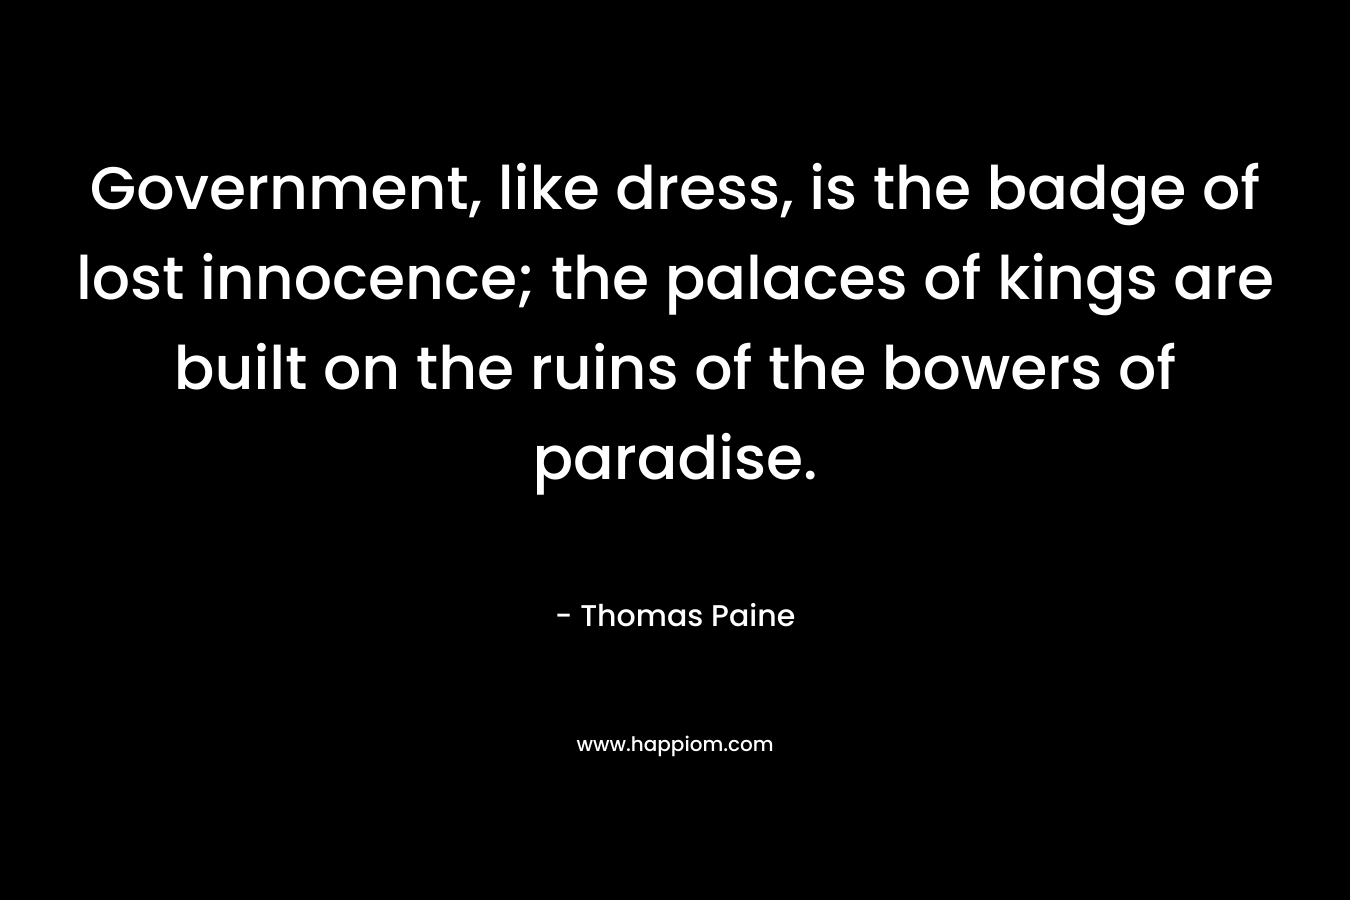 Government, like dress, is the badge of lost innocence; the palaces of kings are built on the ruins of the bowers of paradise.